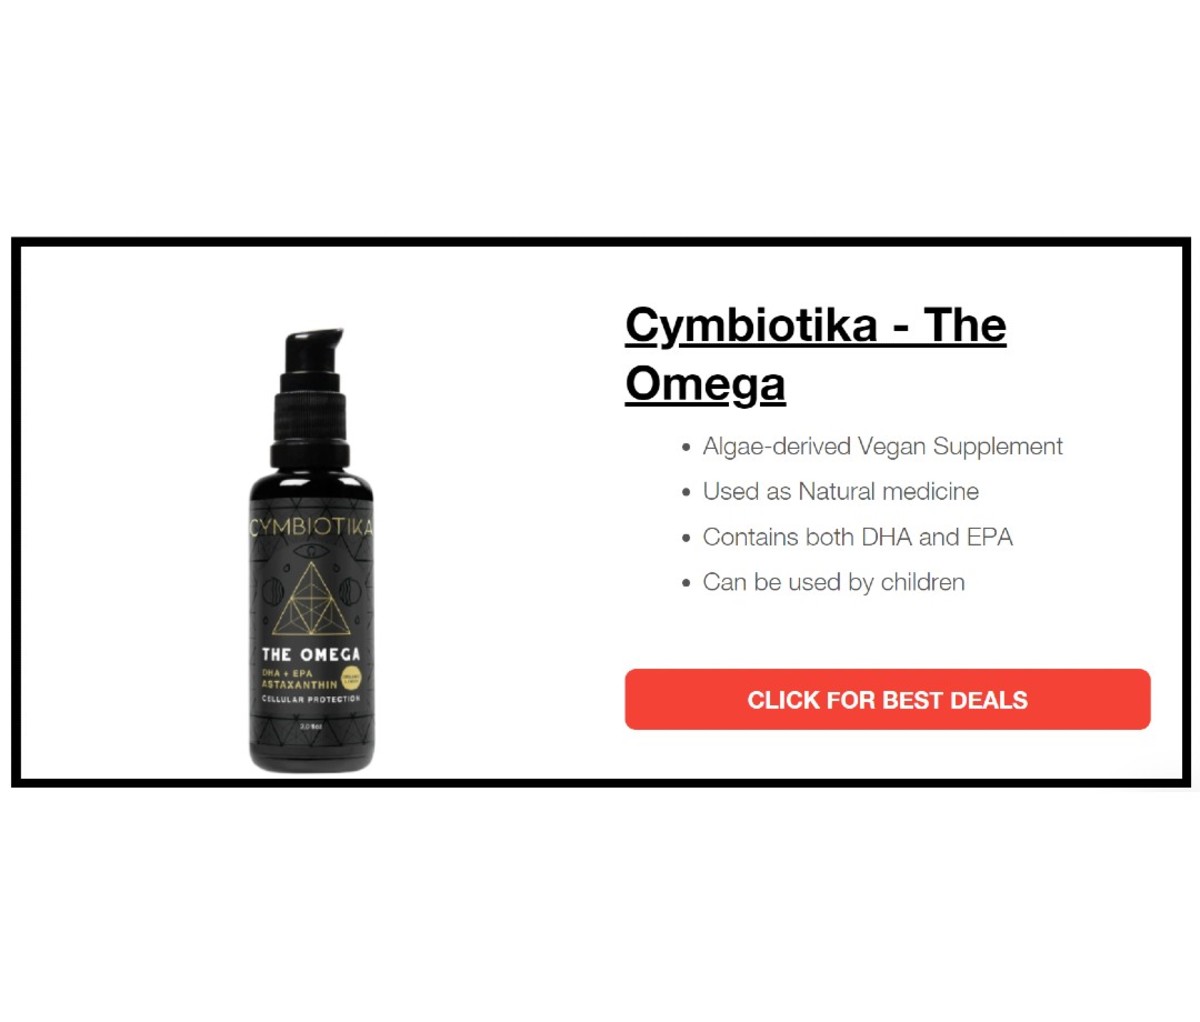 Cymbiotika The Omega - Popular Supplements To Reduce Blood Pressure 